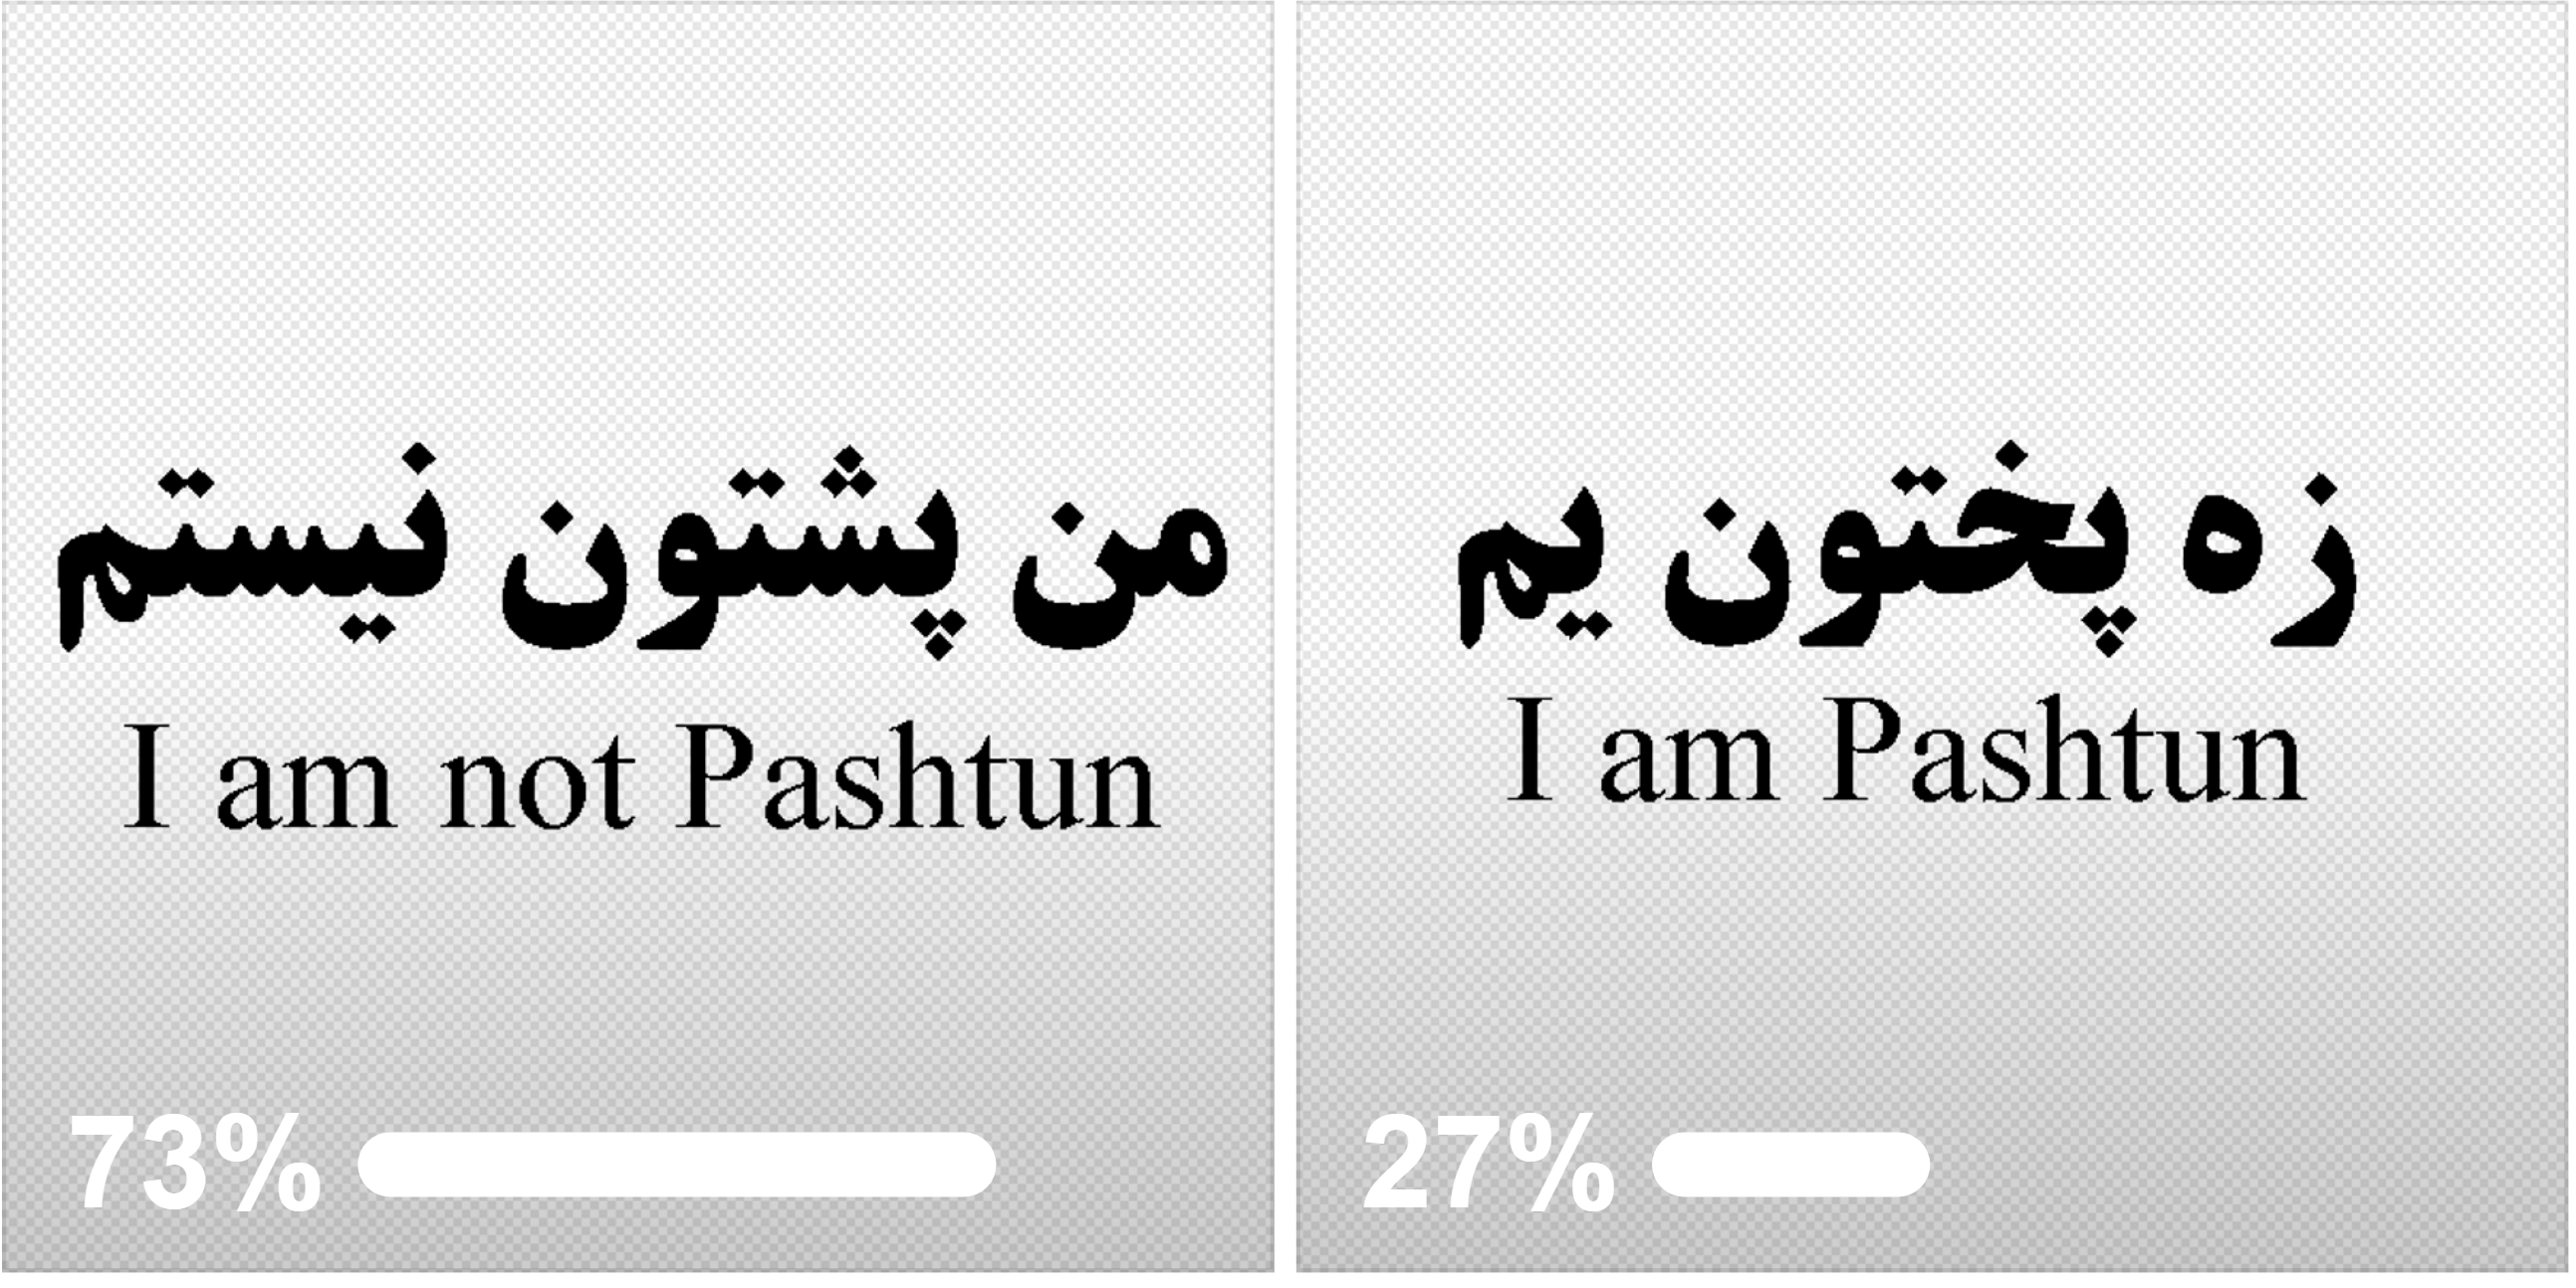 Are Pashtuns really the majority in so-called country Afghanistan?